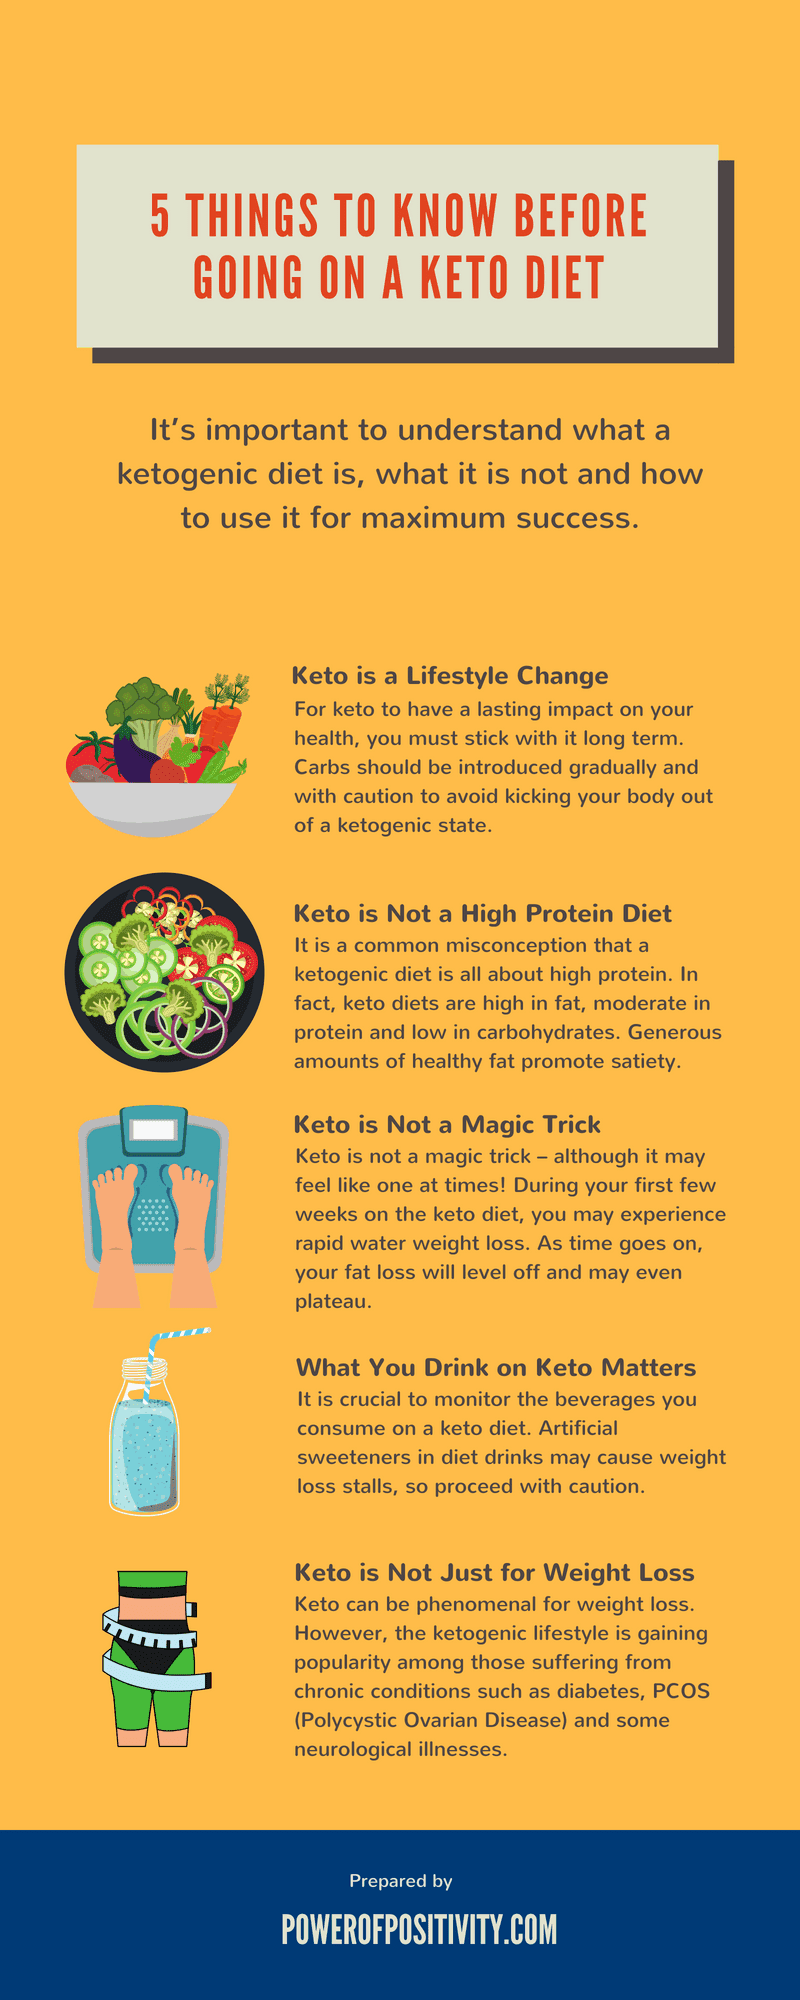 Things to know before going on a keto diet